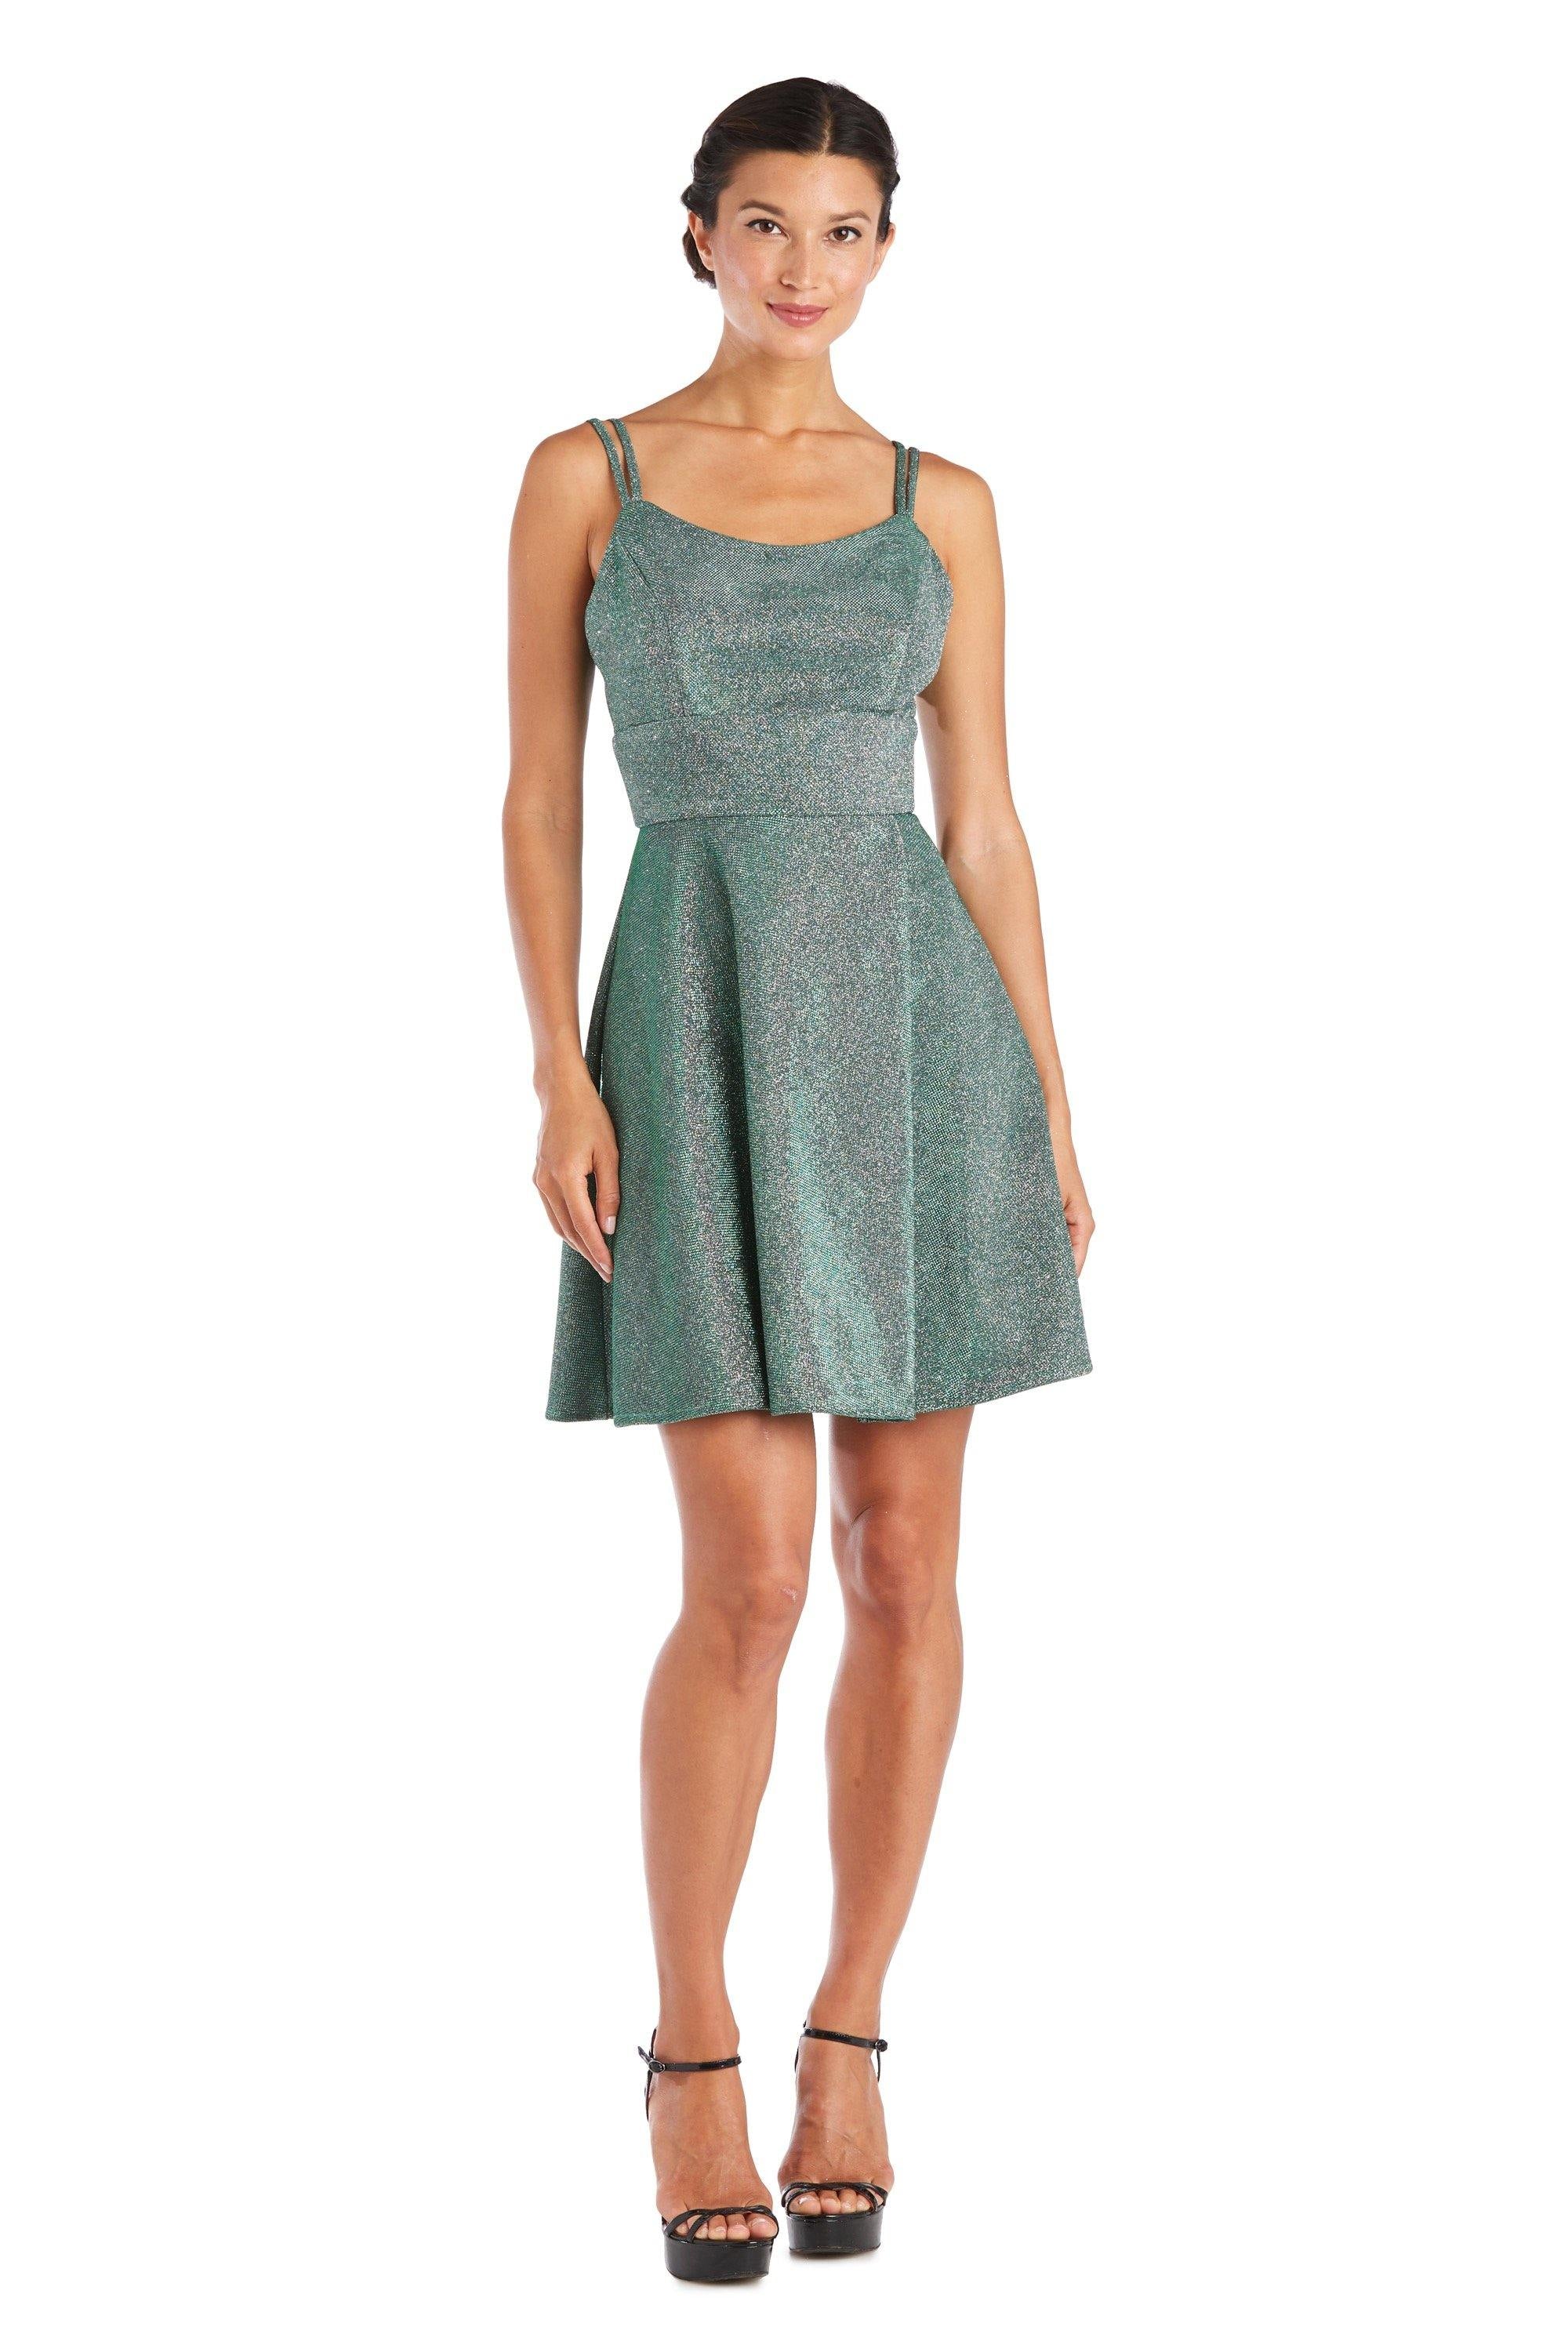 Morgan & Co. Homecoming Prom Short Dress 12730 - The Dress Outlet